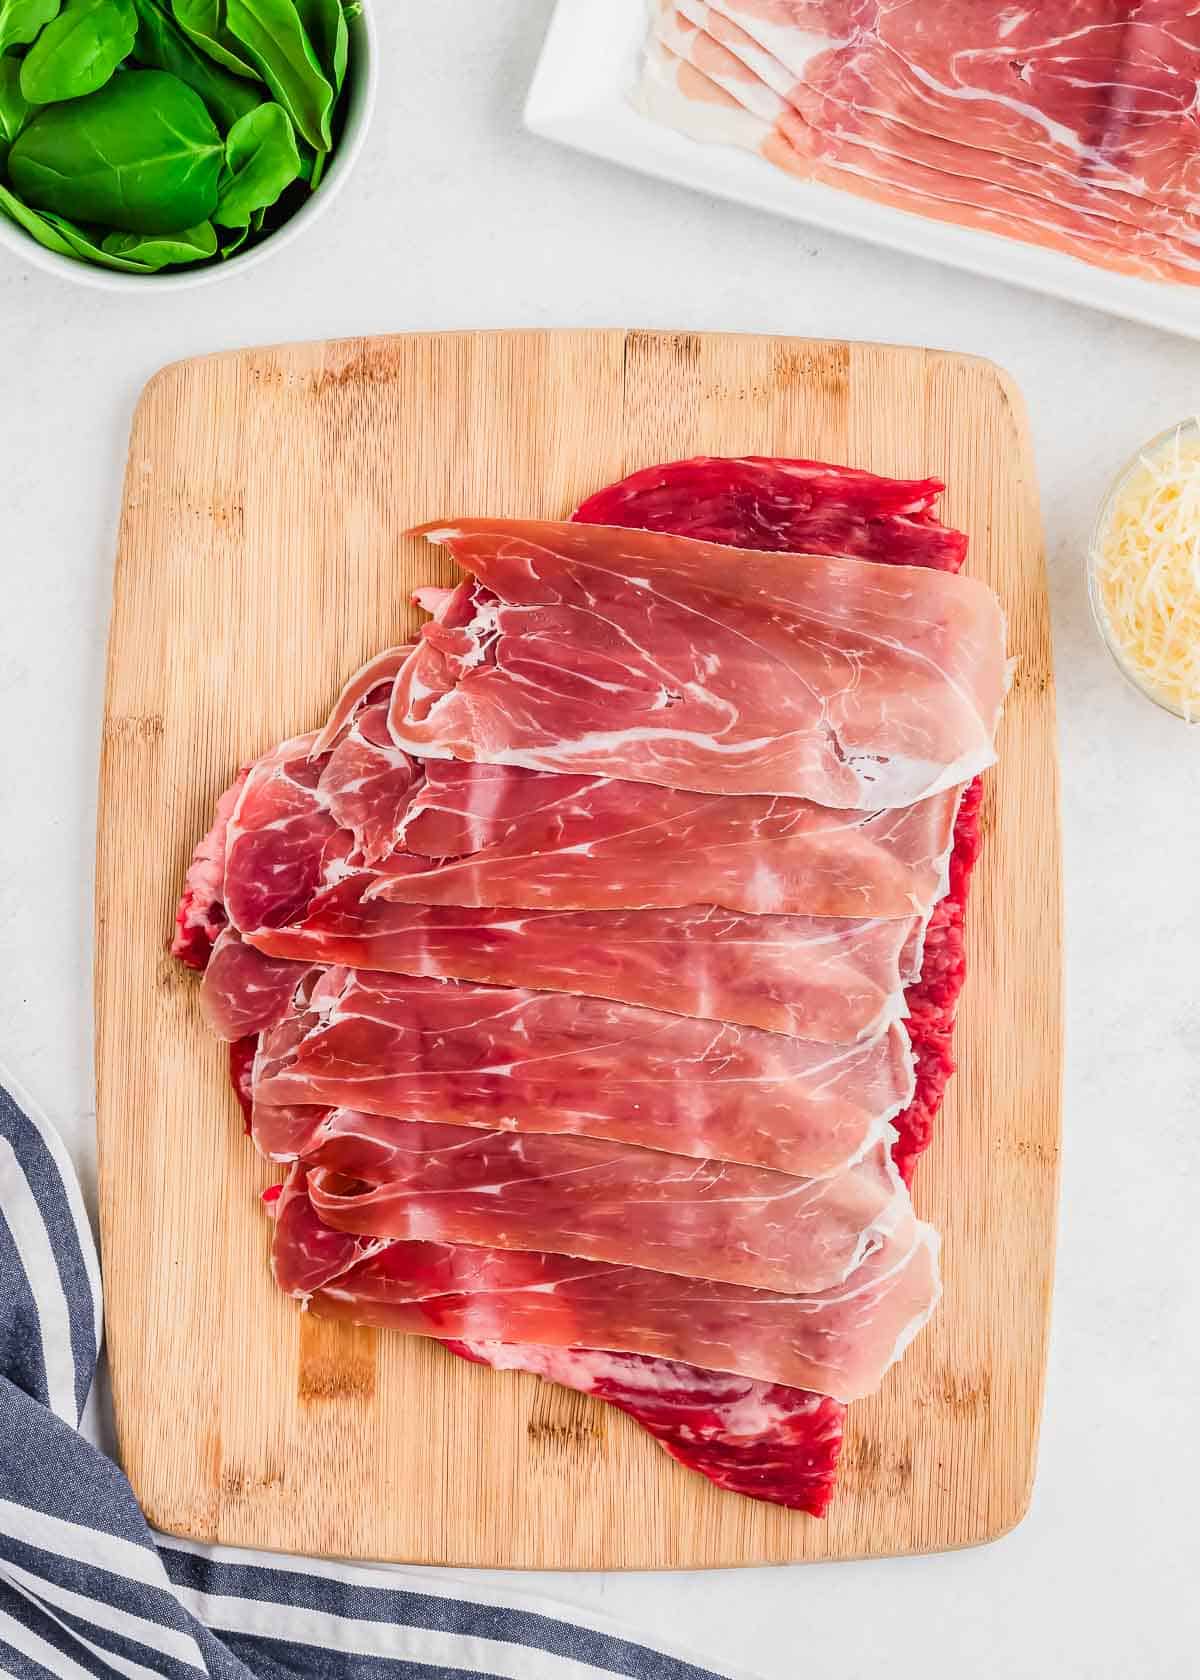 Thin slices of prosciutto arranged on top of pounded flank steak on a wooden cutting board, with a bowl of greens and grated cheese nearby.